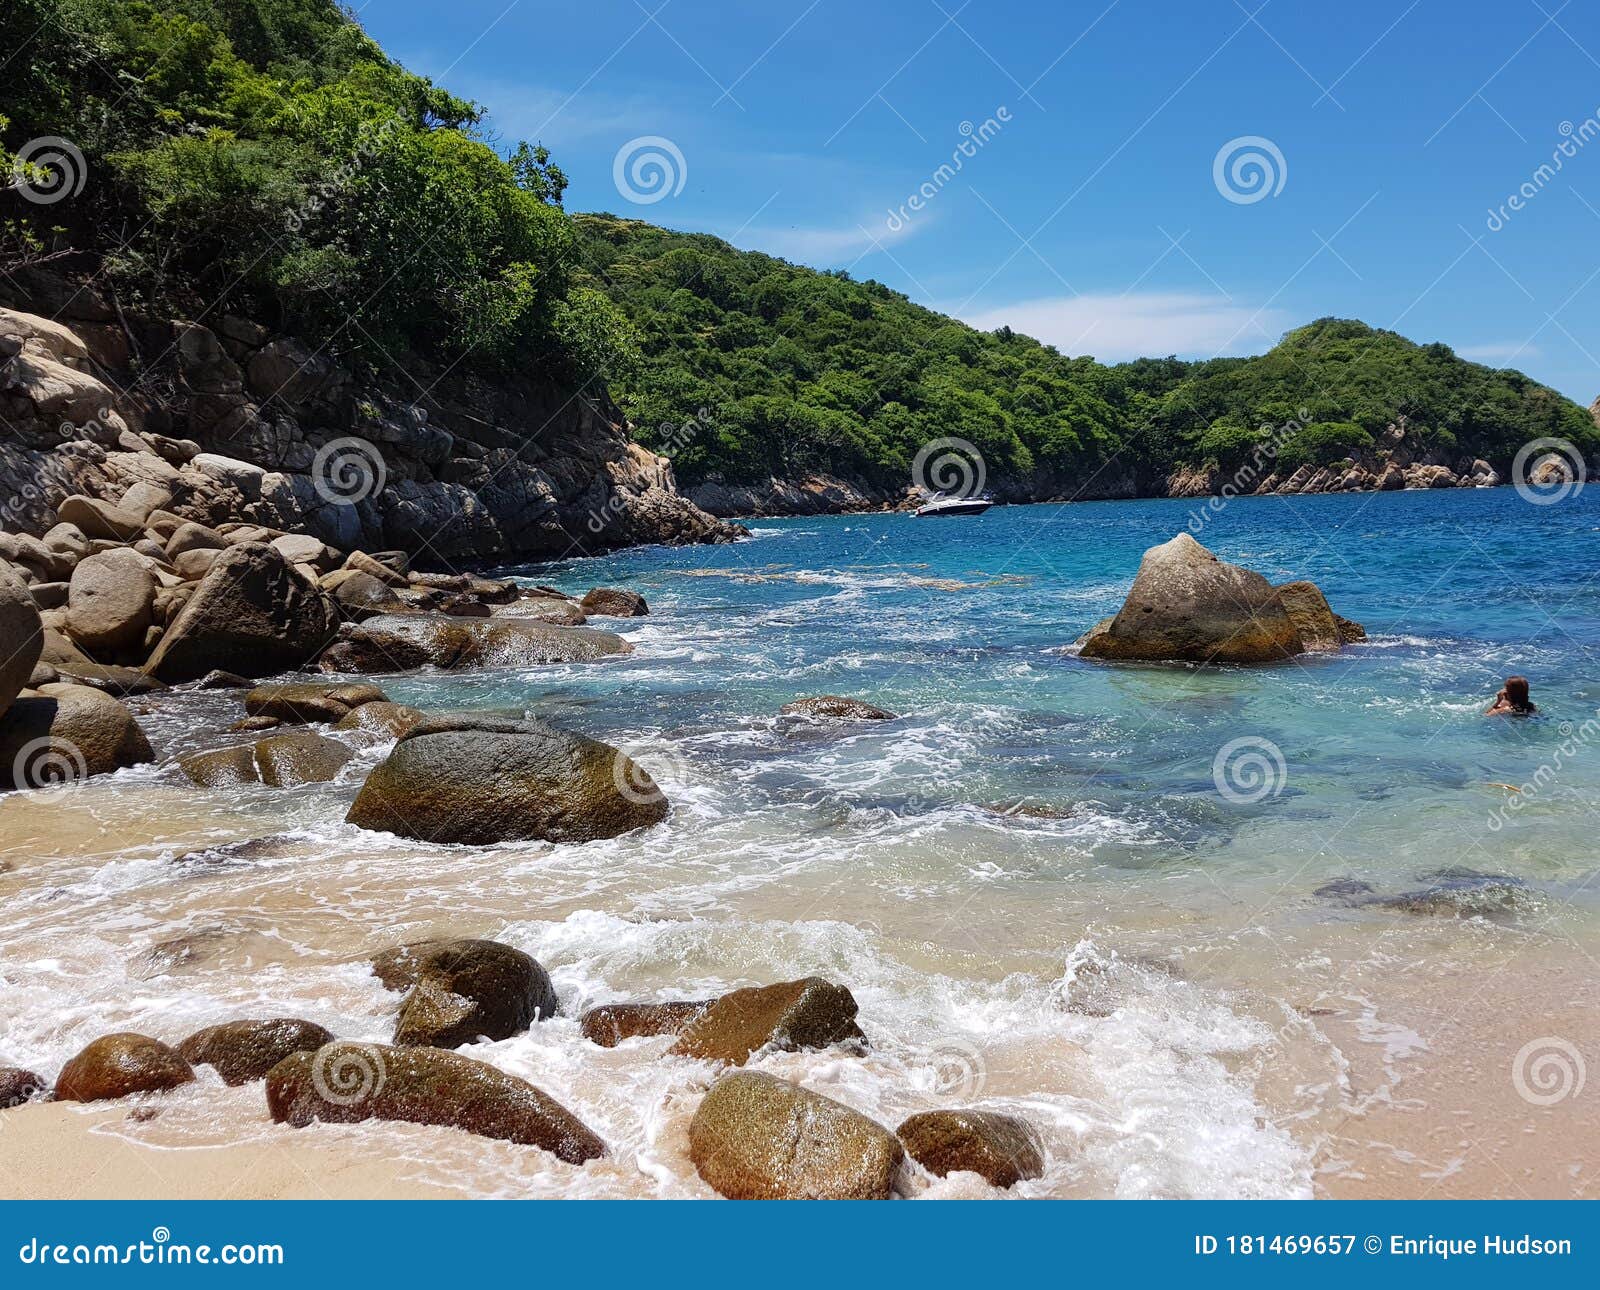 view of lovers` beach, sand rocks and waves on roqueta island